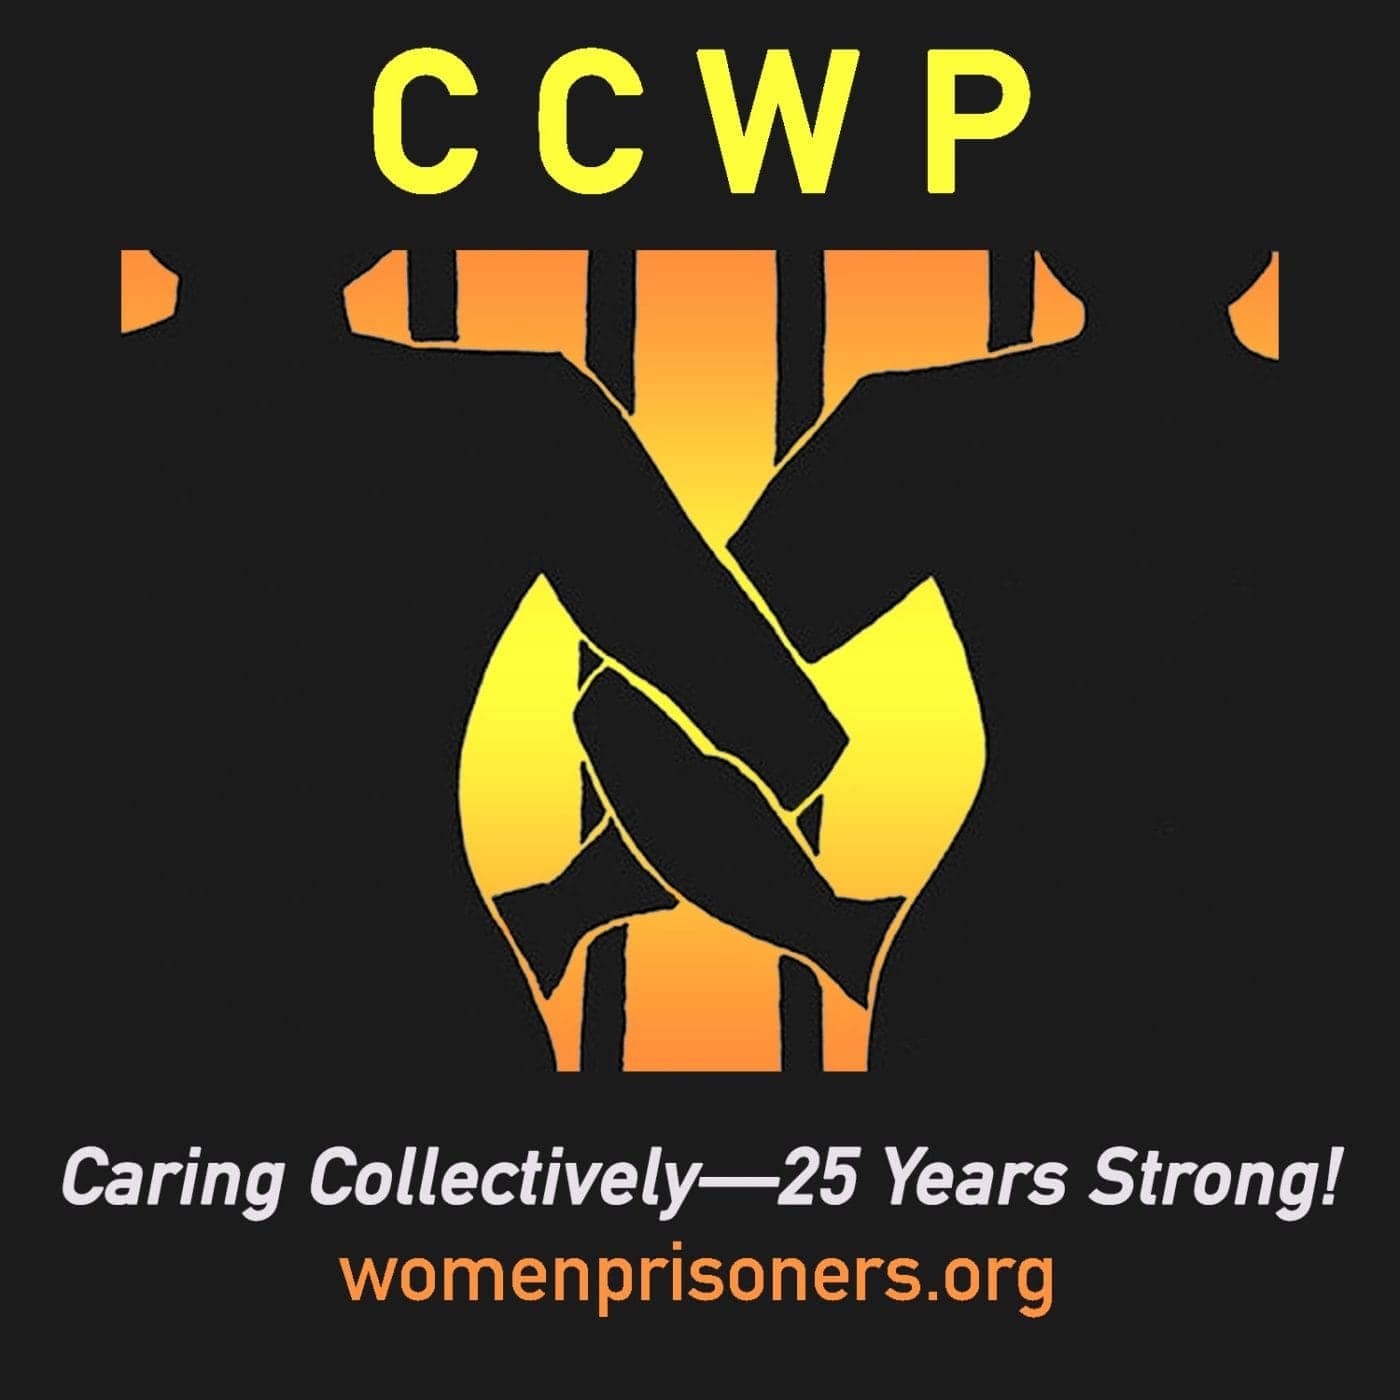 CCWP-logo-Caring-Collectively-25-Years-Strong-womenprisoners.org-2021-1400x1400, California Coalition for Women Prisoners’ statement on SB 132 implementation, Behind Enemy Lines 